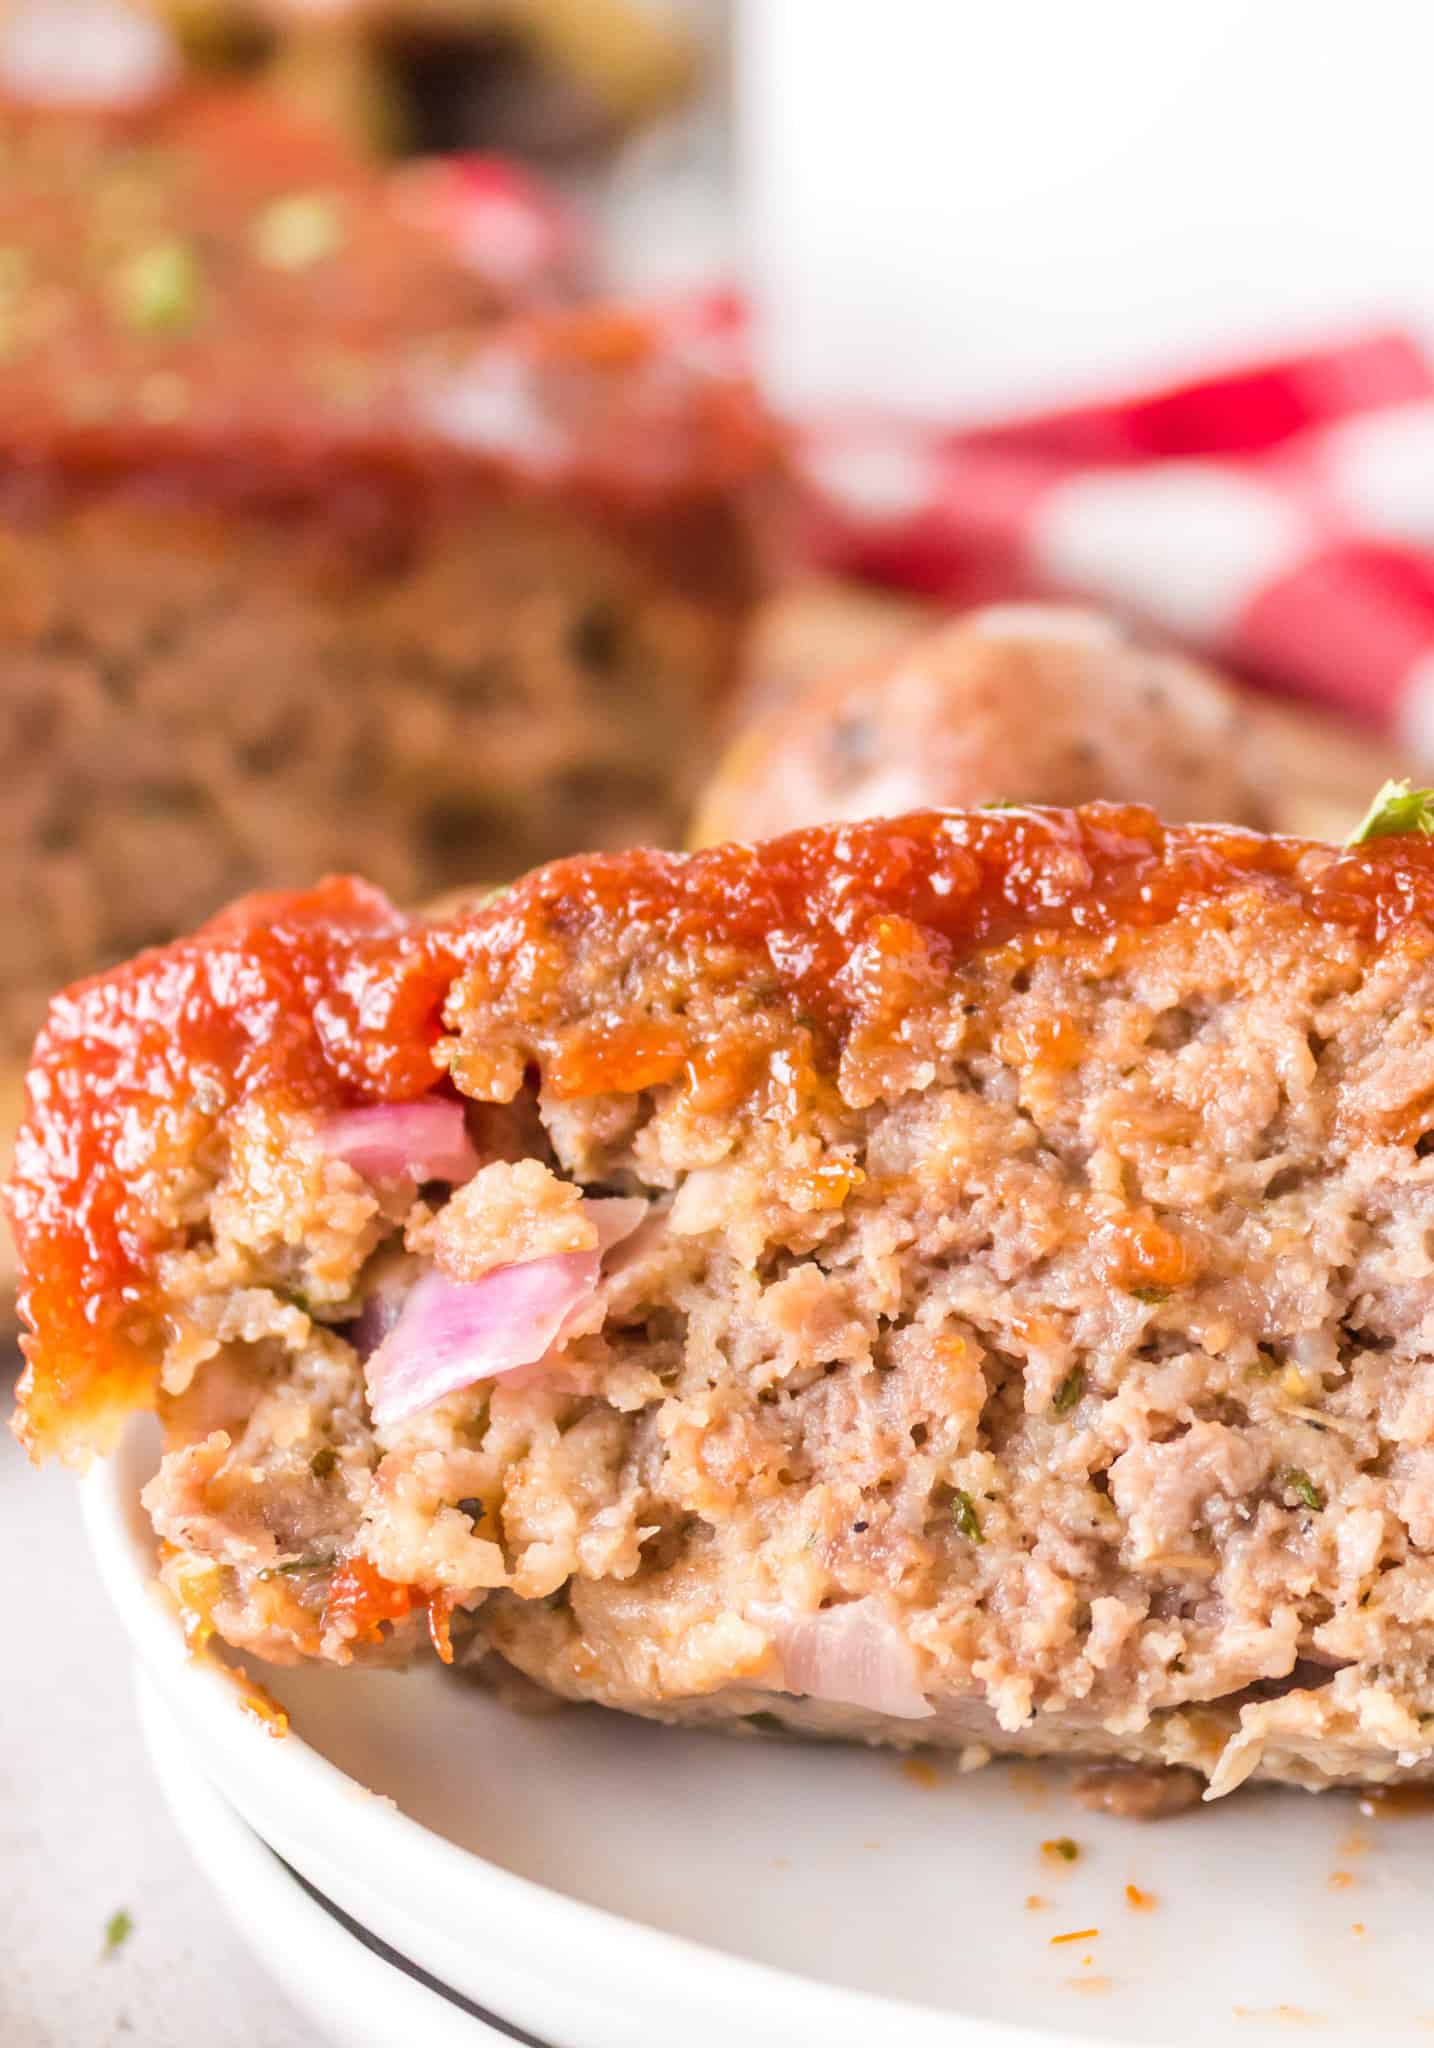 Air Fryer Meatloaf is a simple ground beef meatloaf recipe made with Italian seasoned bread crumbs and topped with a brown sugar ketchup glaze.